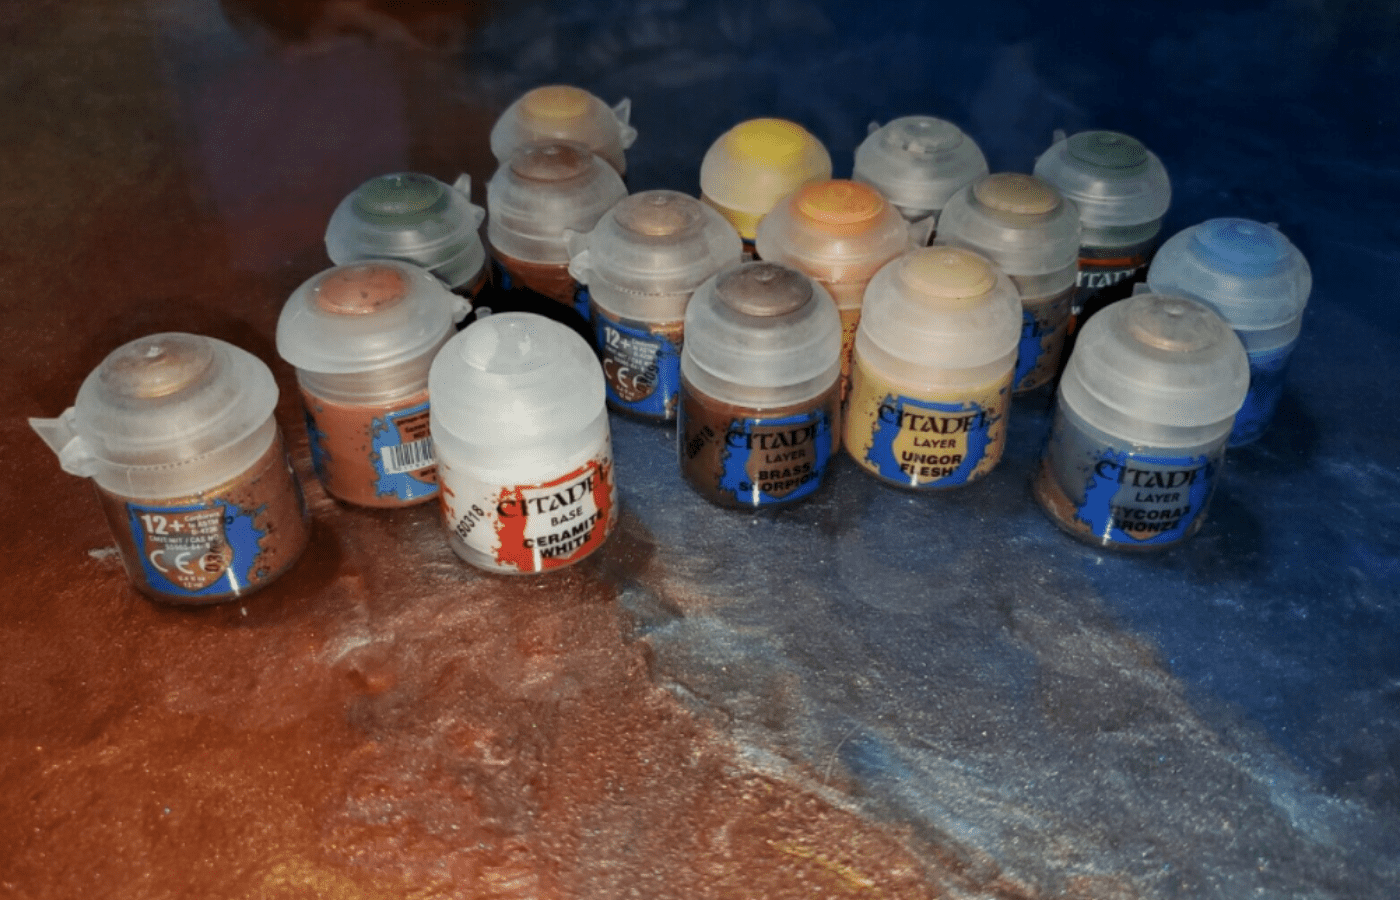 How Much Do Citadel Paints Cost